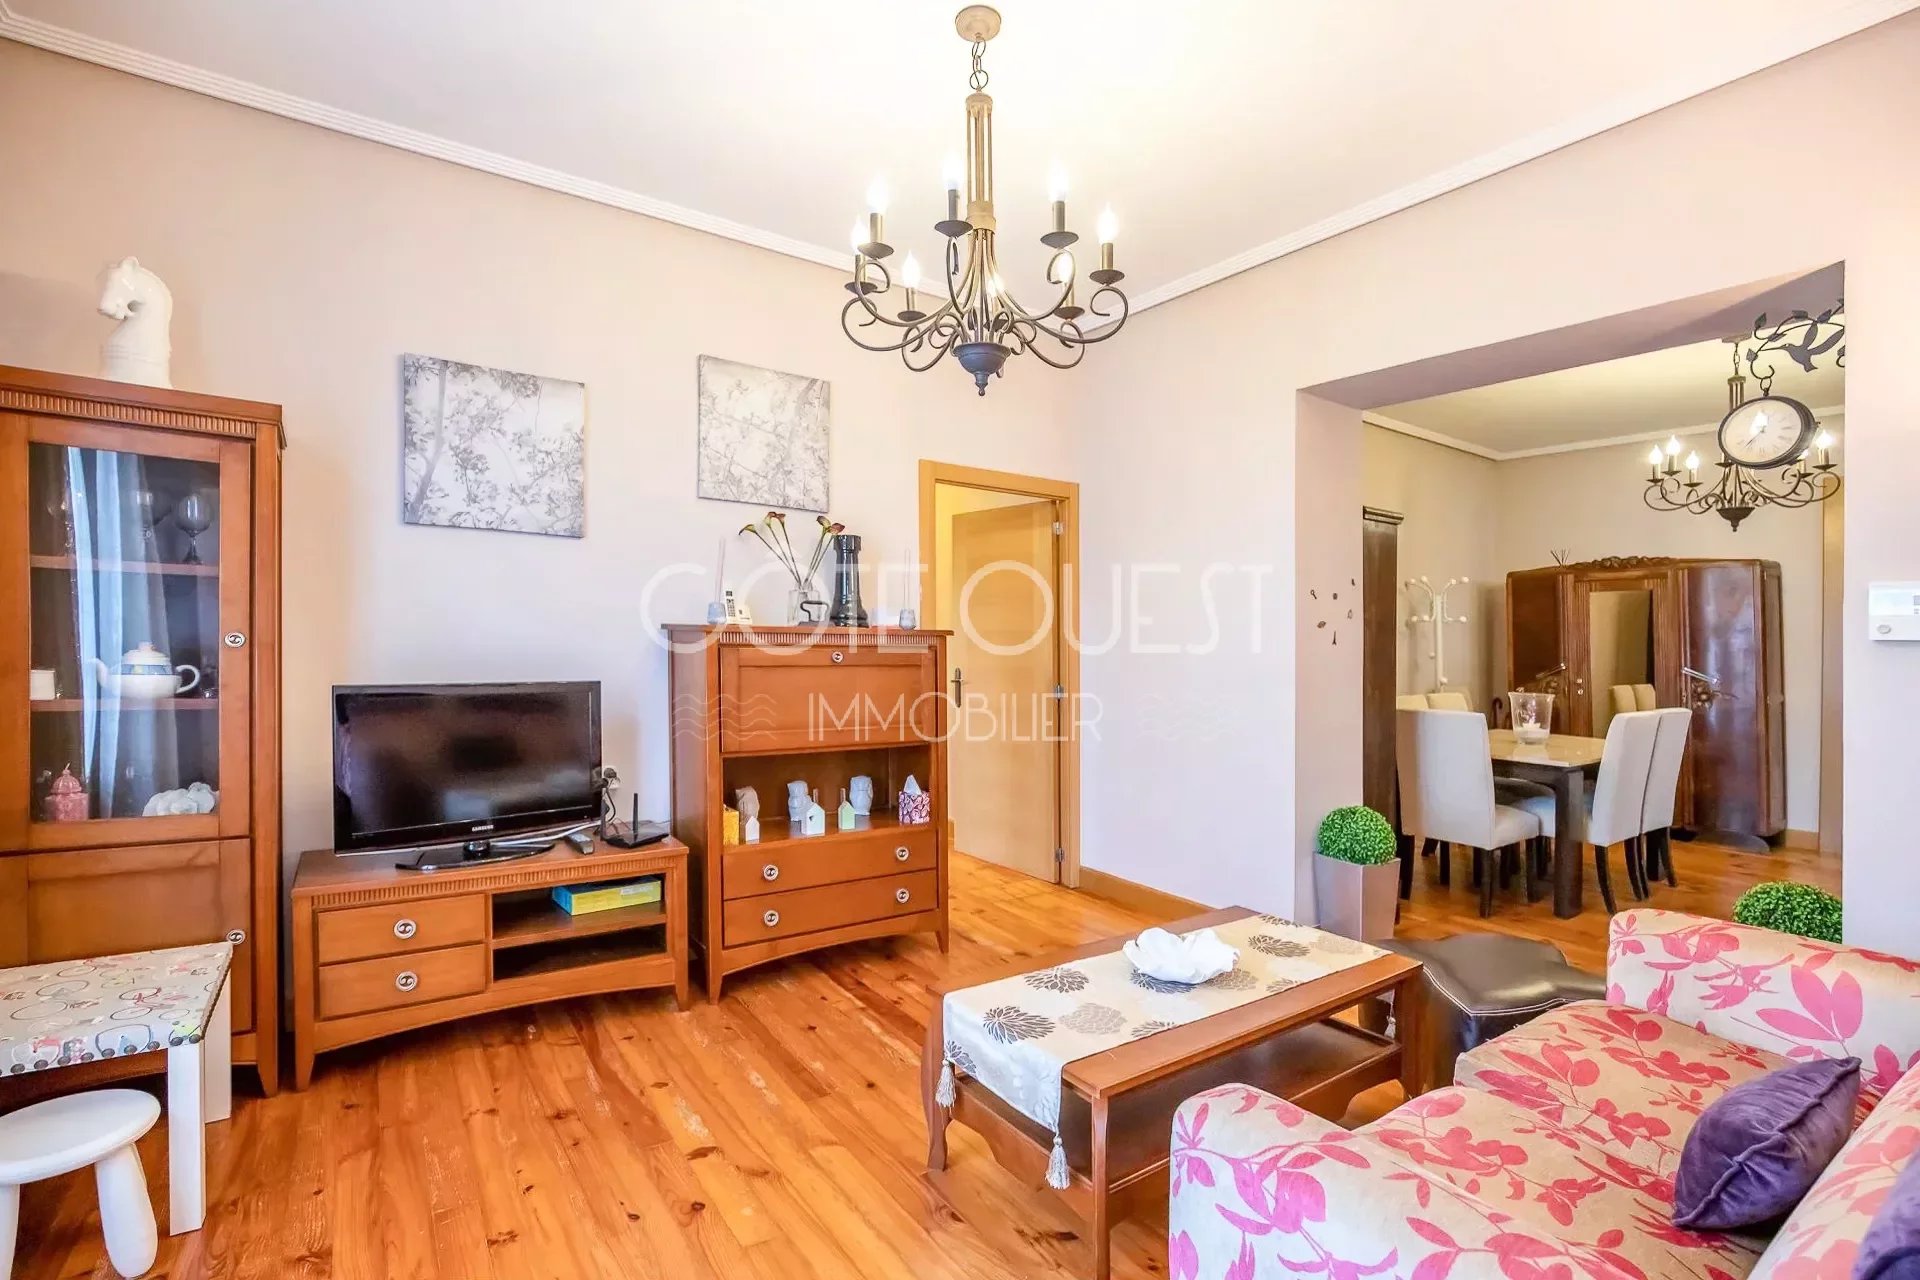 A 4-ROOM APARTMENT IN THE HEART OF BIARRITZ